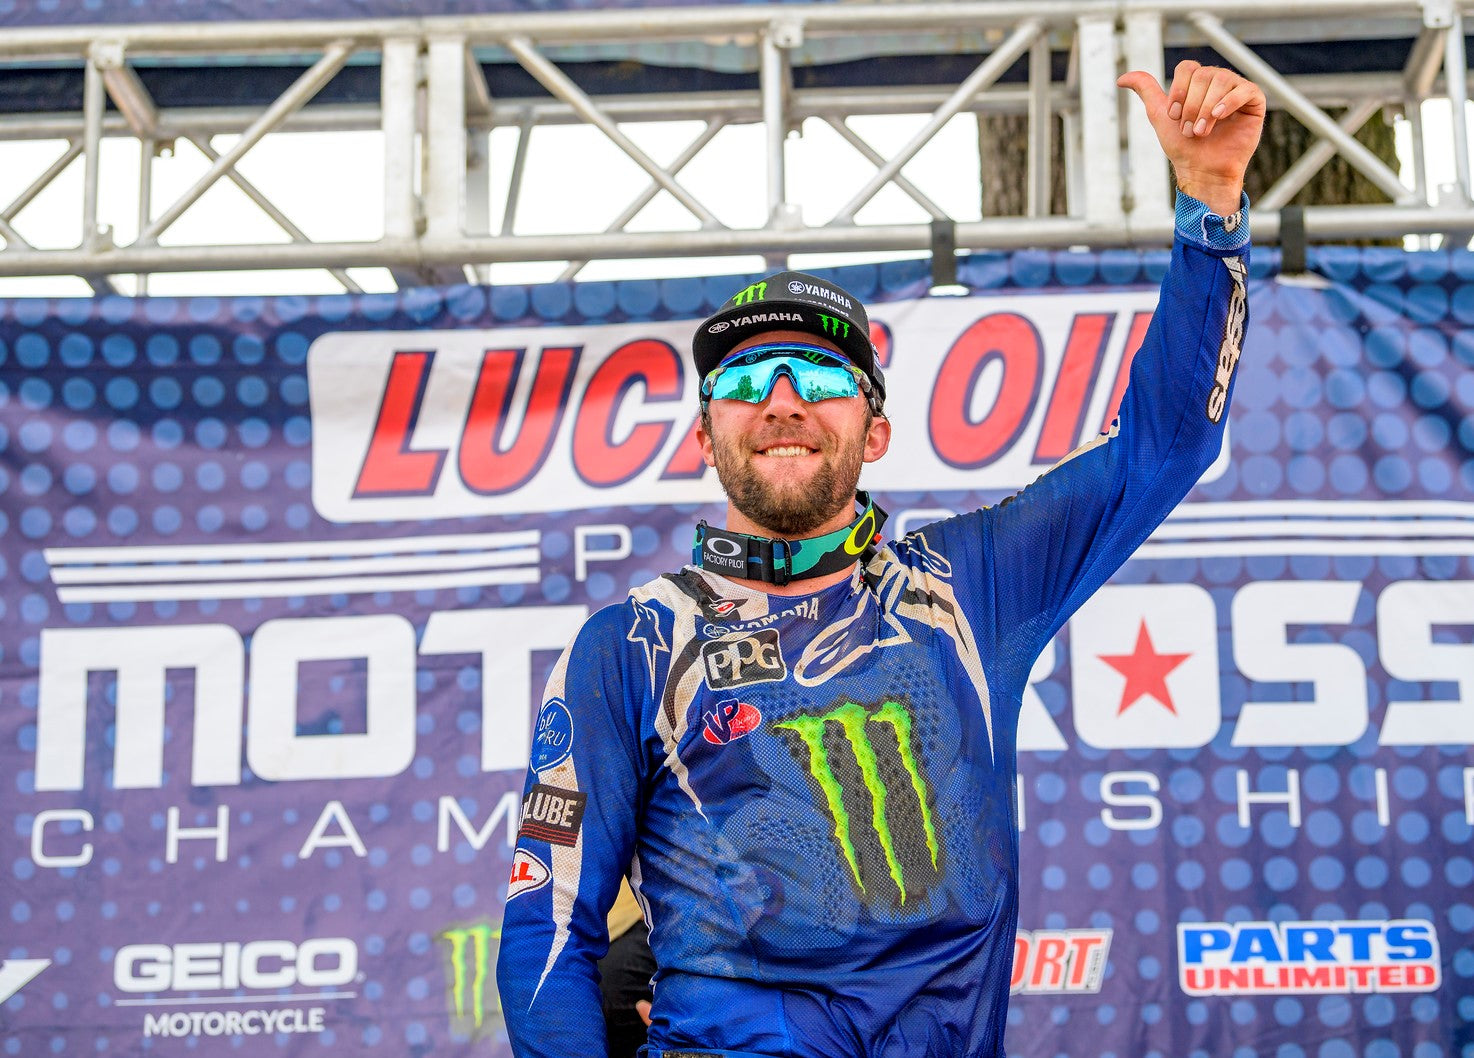 ELI TOMAC UNTOUCHABLE AS ALPINESTARS SWEEP AMA 450 PRO MOTOCROSS PODIUM WITH CHASE SEXTON SECOND AND JUSTIN BARCIA THIRD IN RED BUD, MICHIGAN